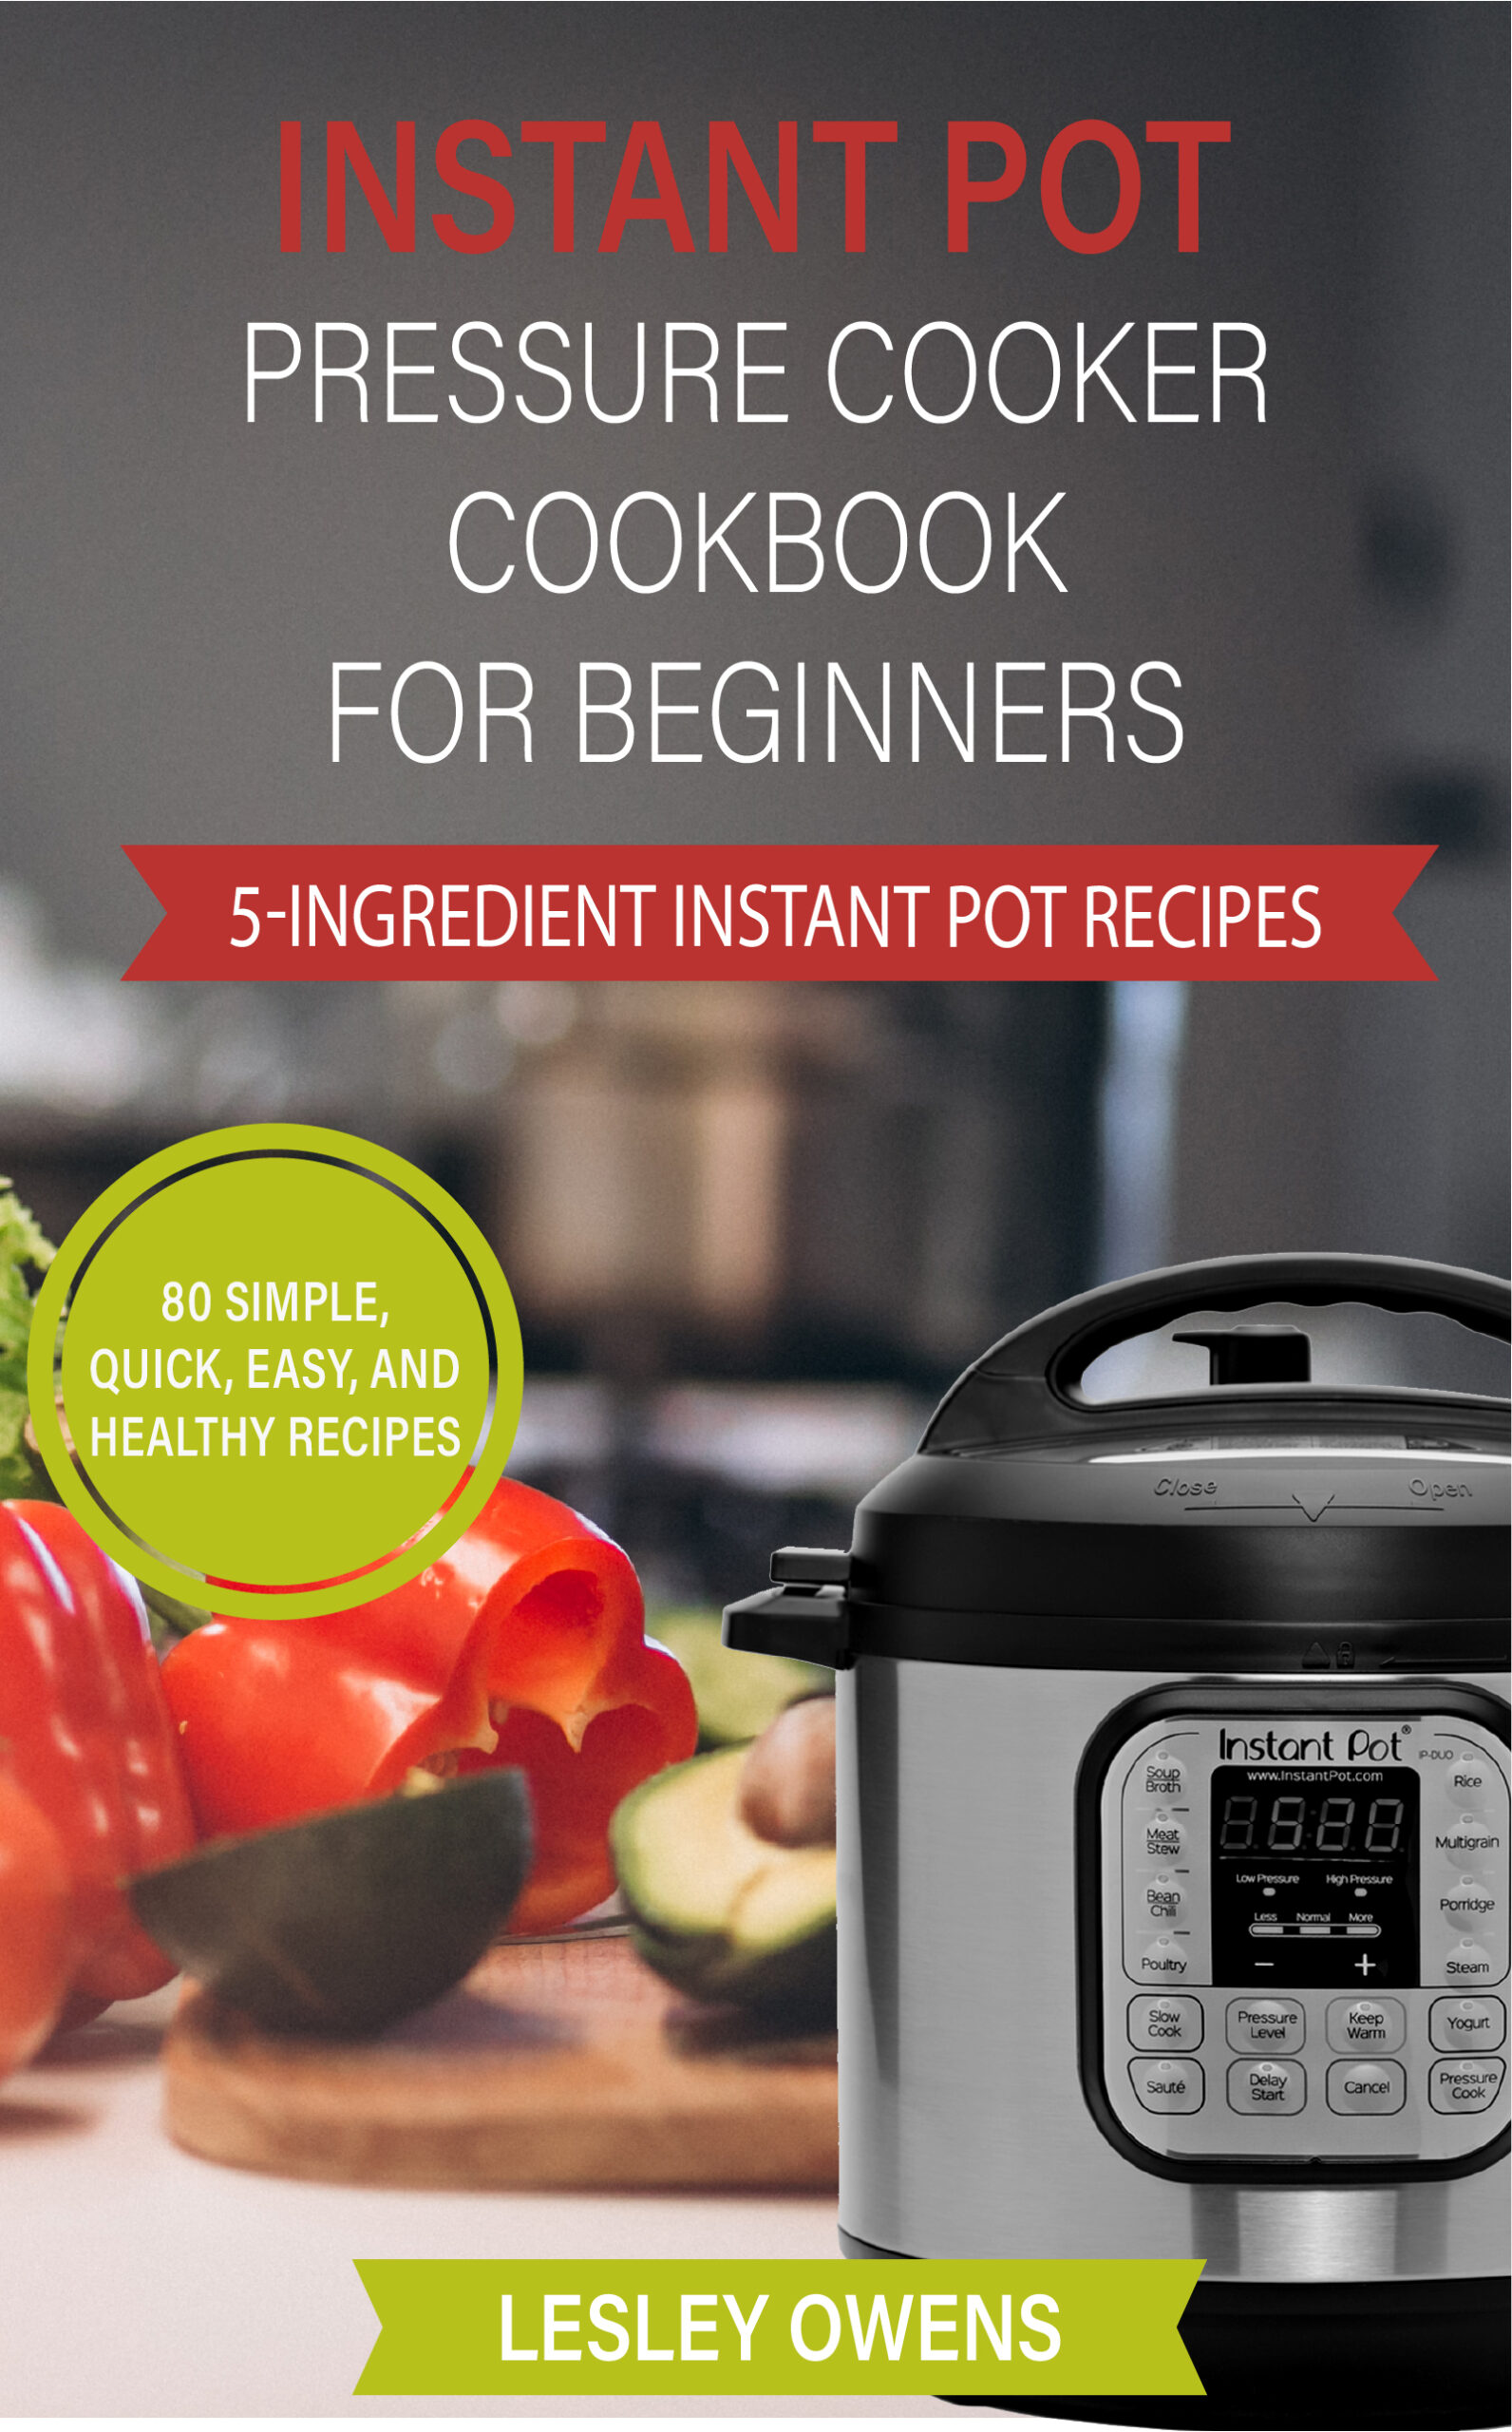 FREE: Instant Pot Pressure Cooker Cookbook for Beginners: 5-Ingredient Instant Pot Recipes – 80 Simple, Quick, Easy, and Healthy Recipes by Lesley Owens